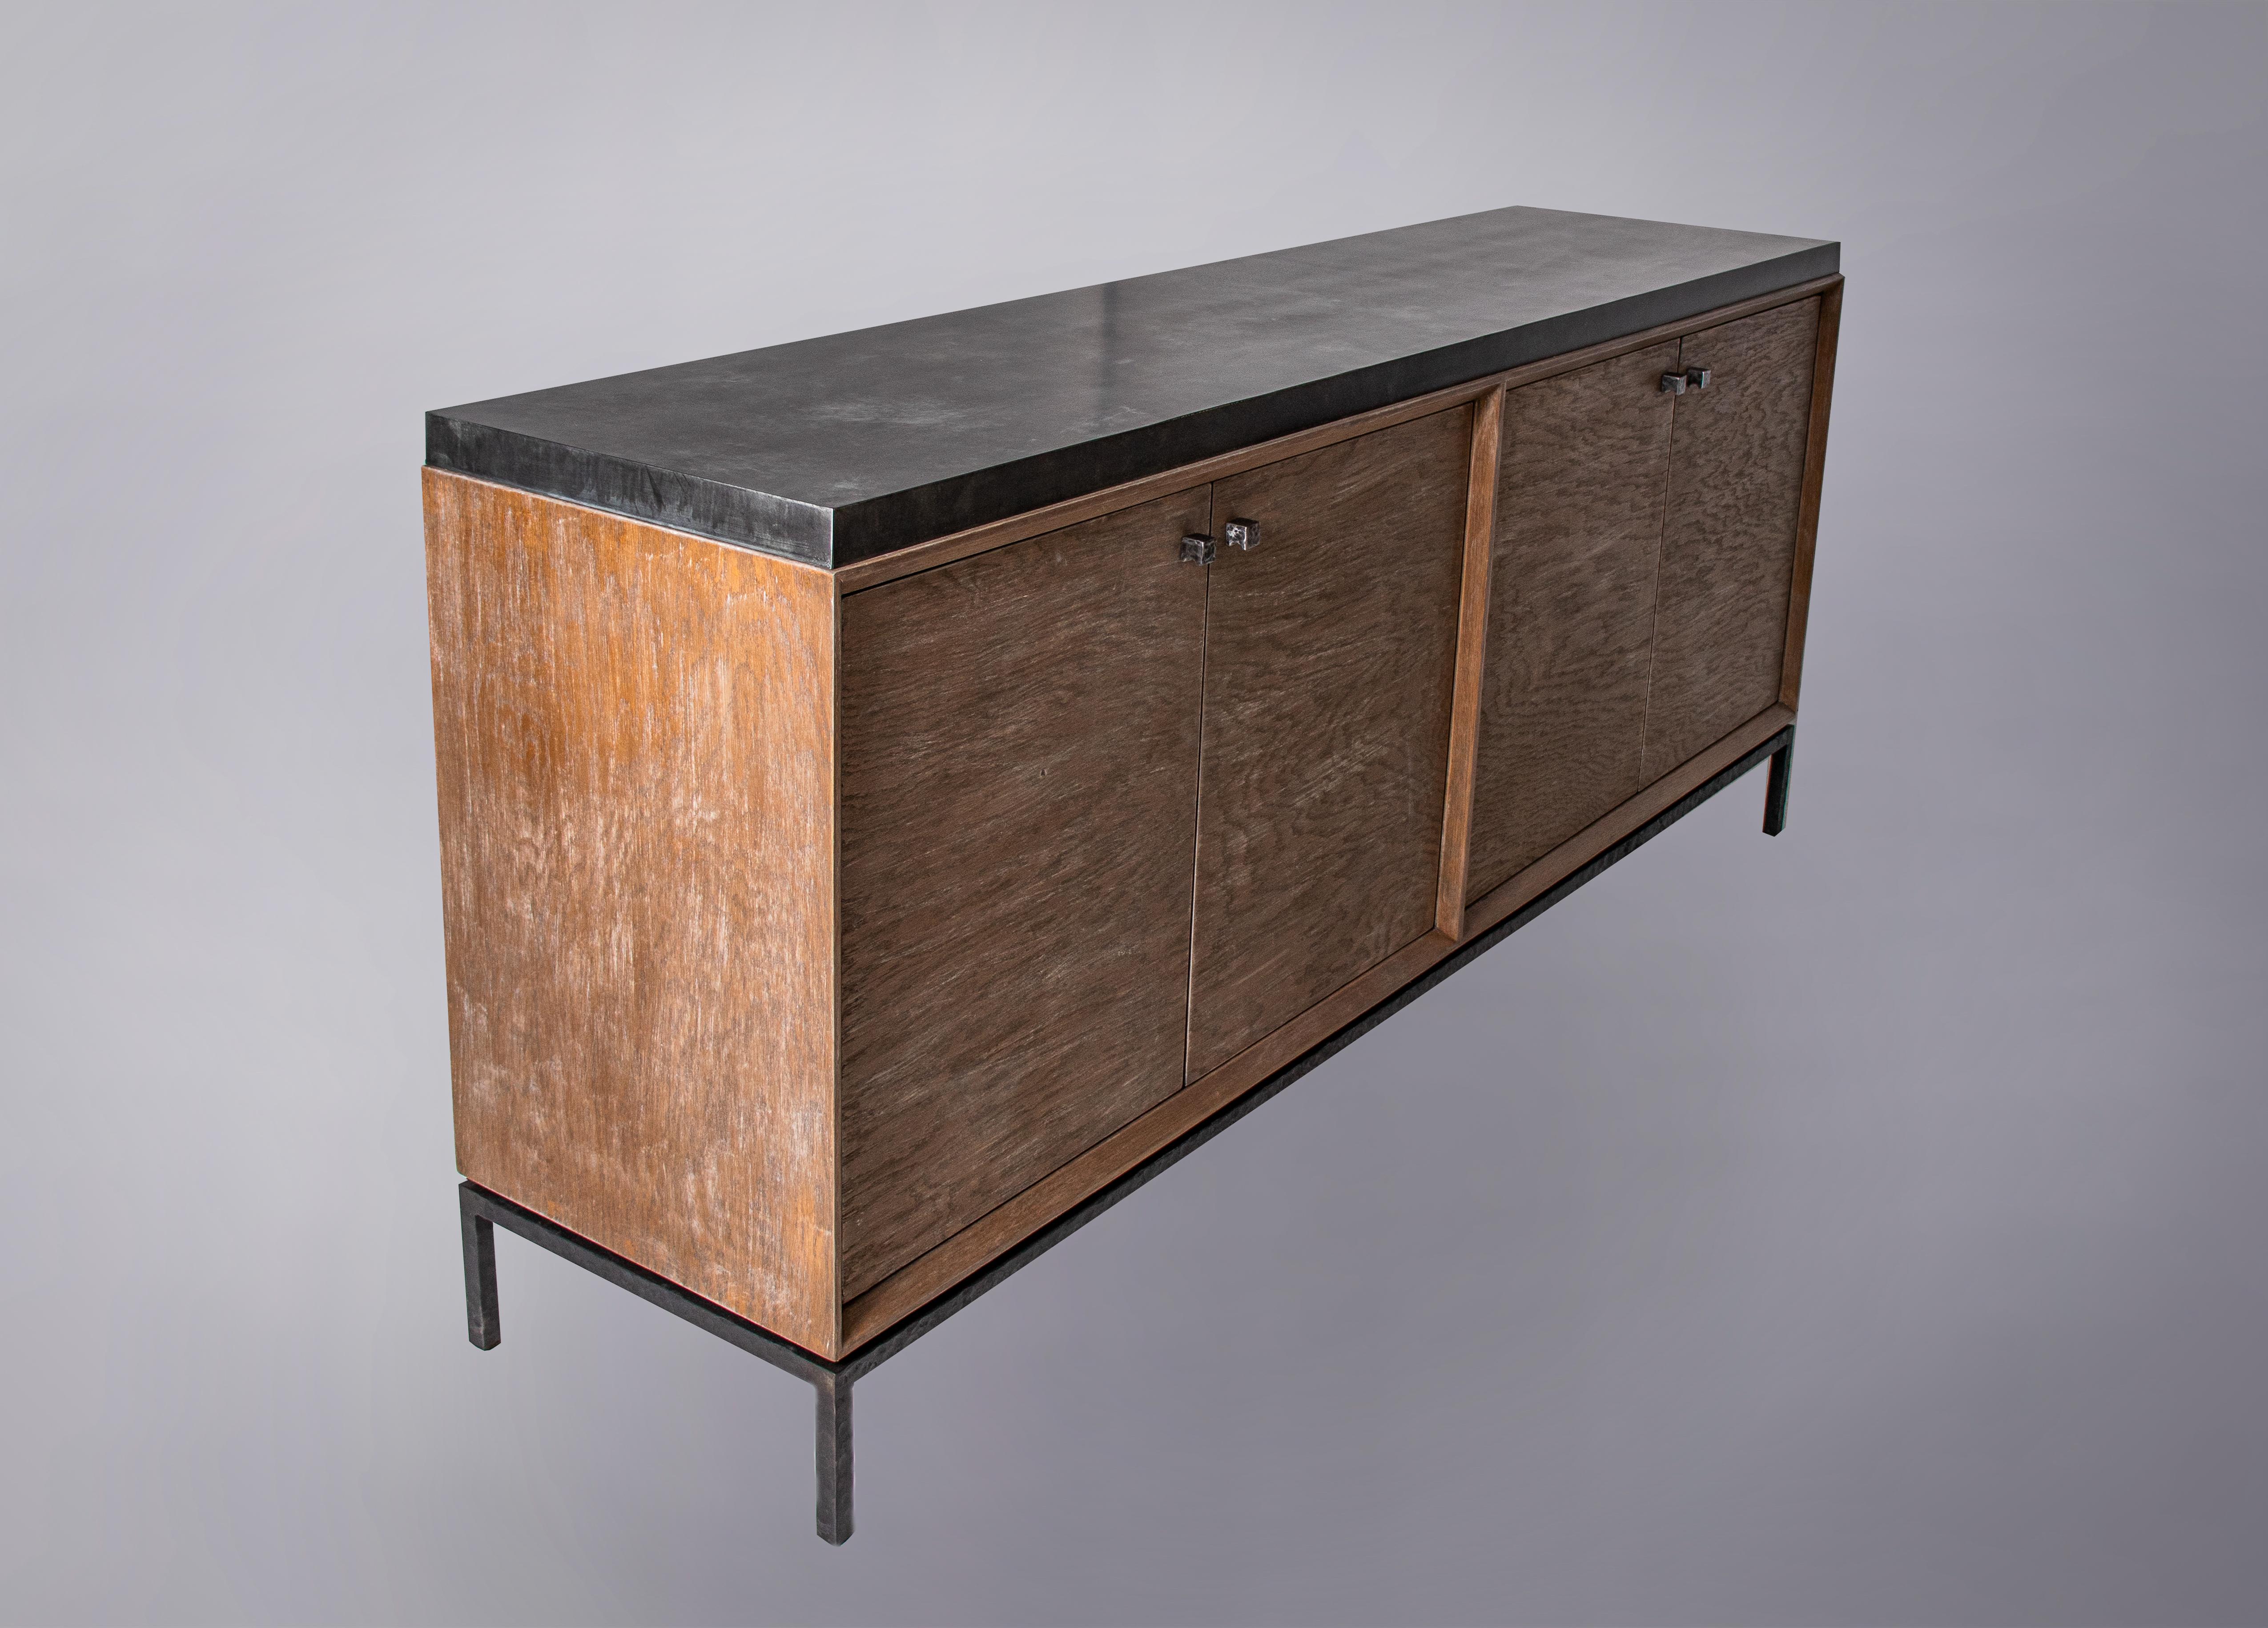 North American Custom aged bronze zinc top four door cabinet with dark hammered steel base. For Sale